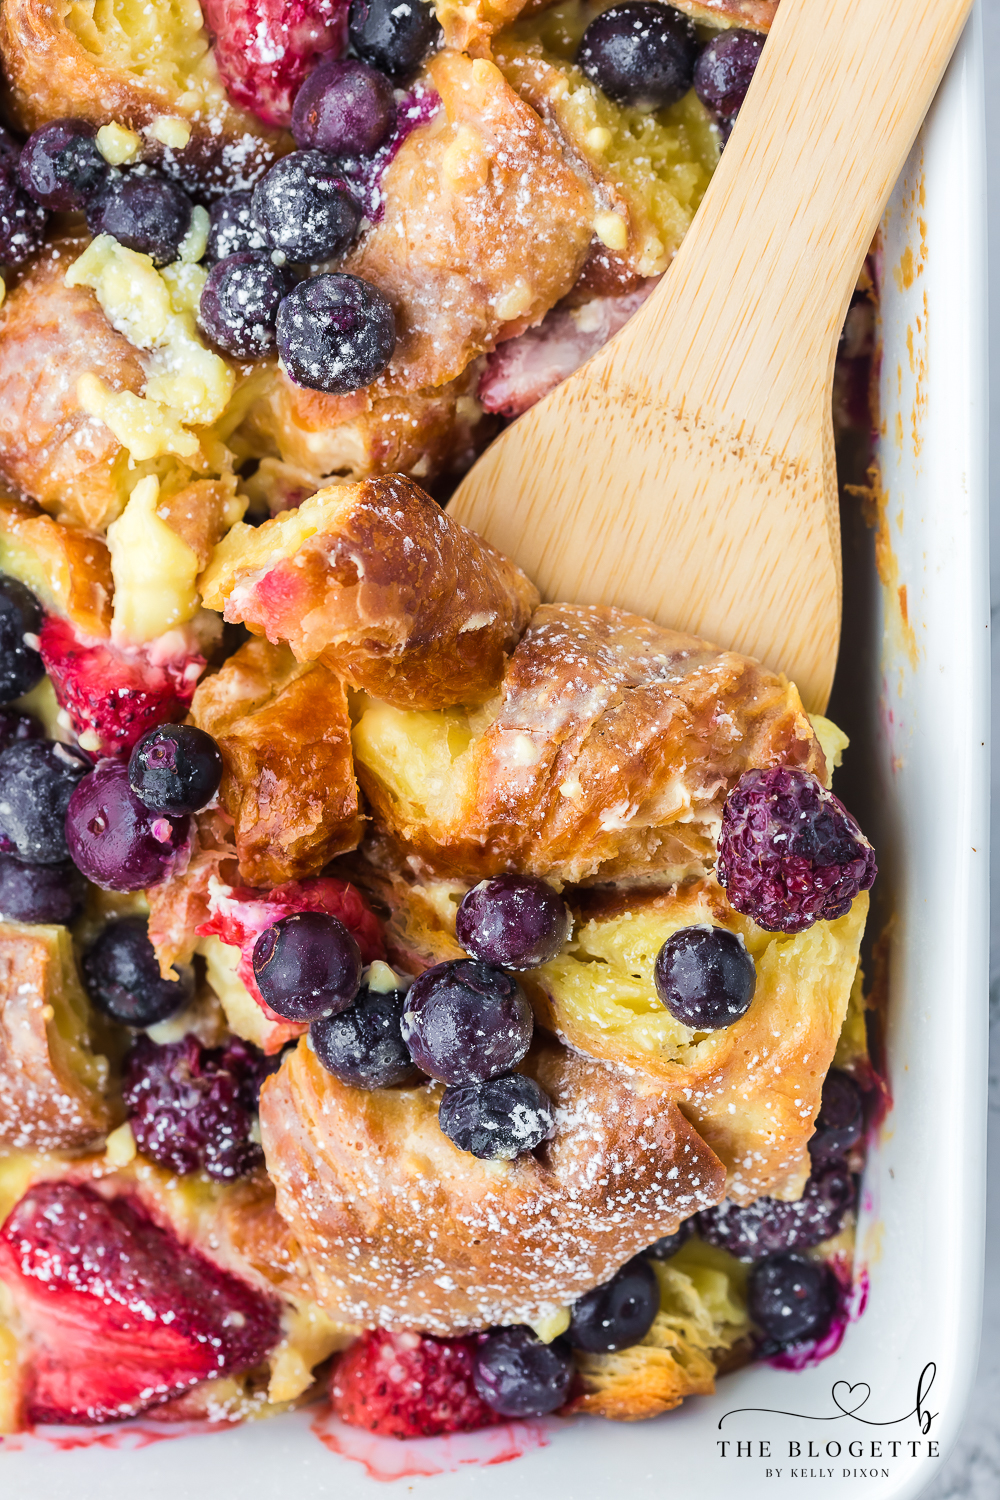 Make-ahead Berry Croissant Bake recipe is perfect for a weekend brunch or special occasion breakfast.